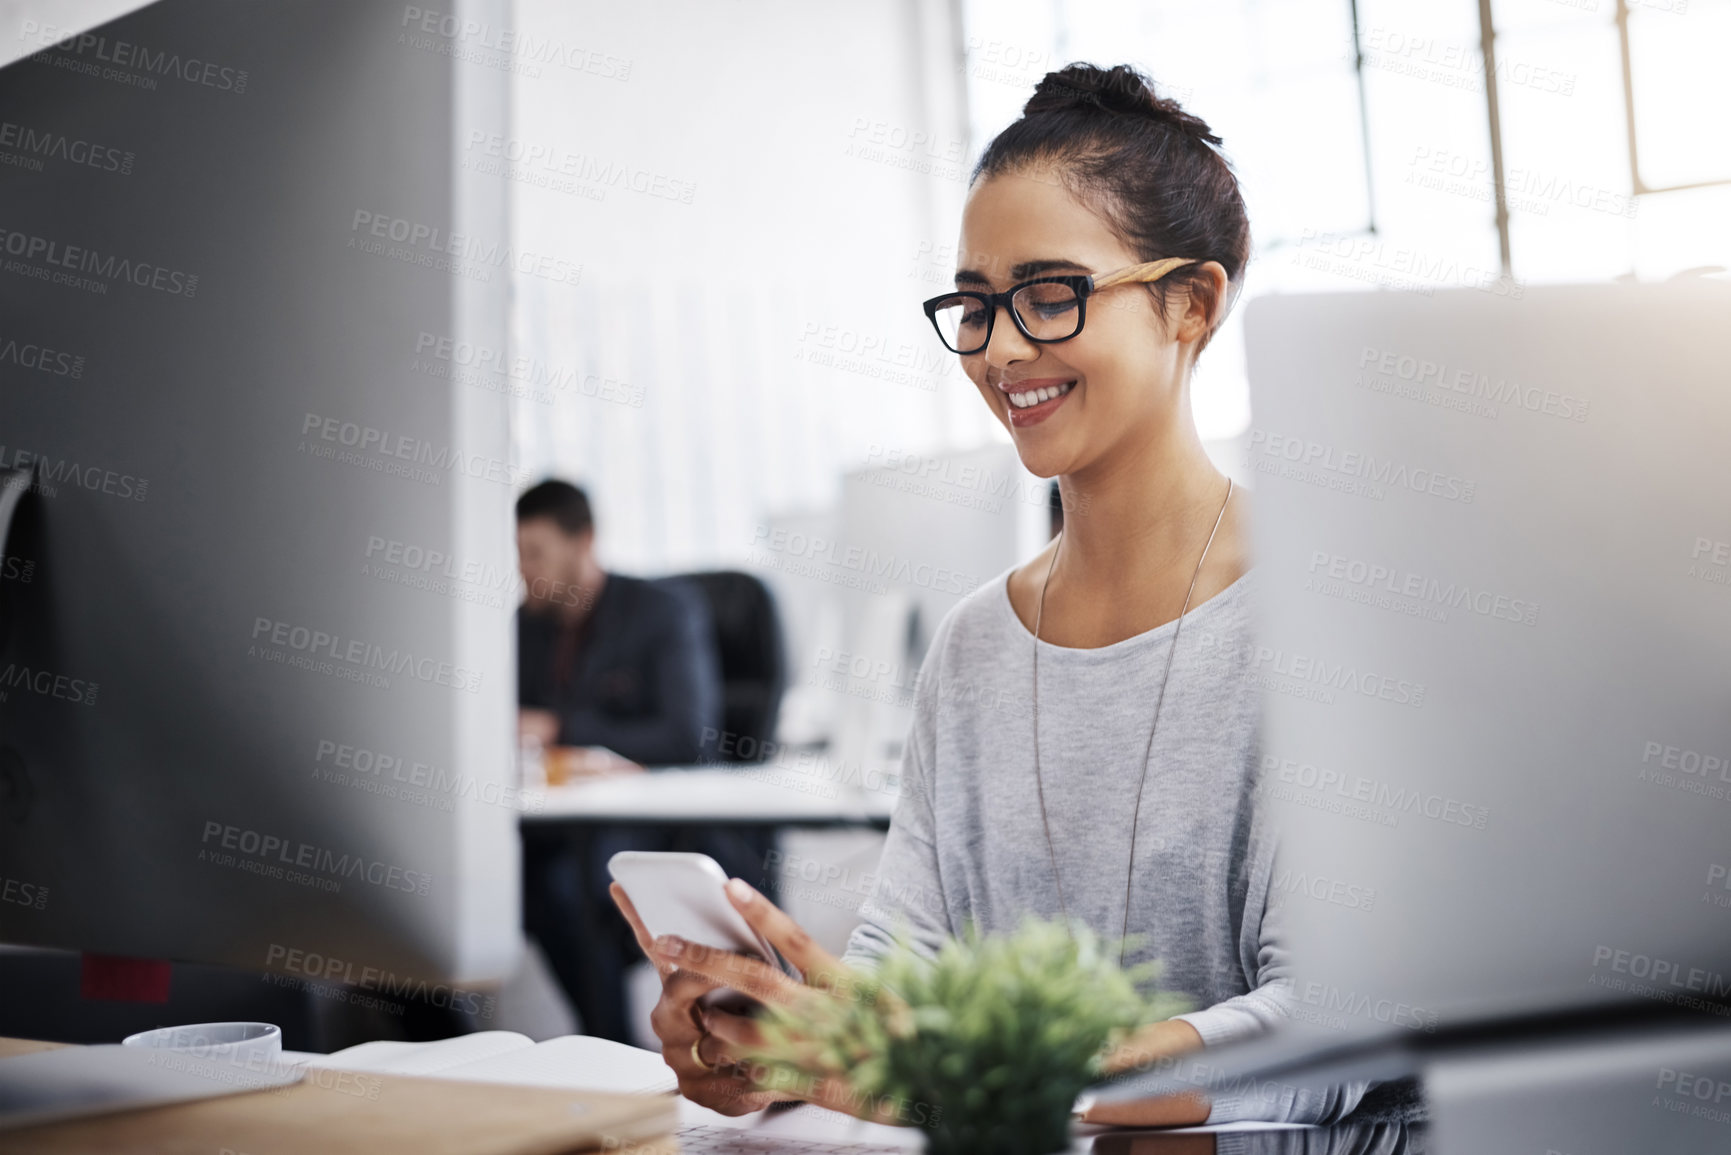 Buy stock photo Shot of a young businesswoman using a mobile phone at her desk in a modern office